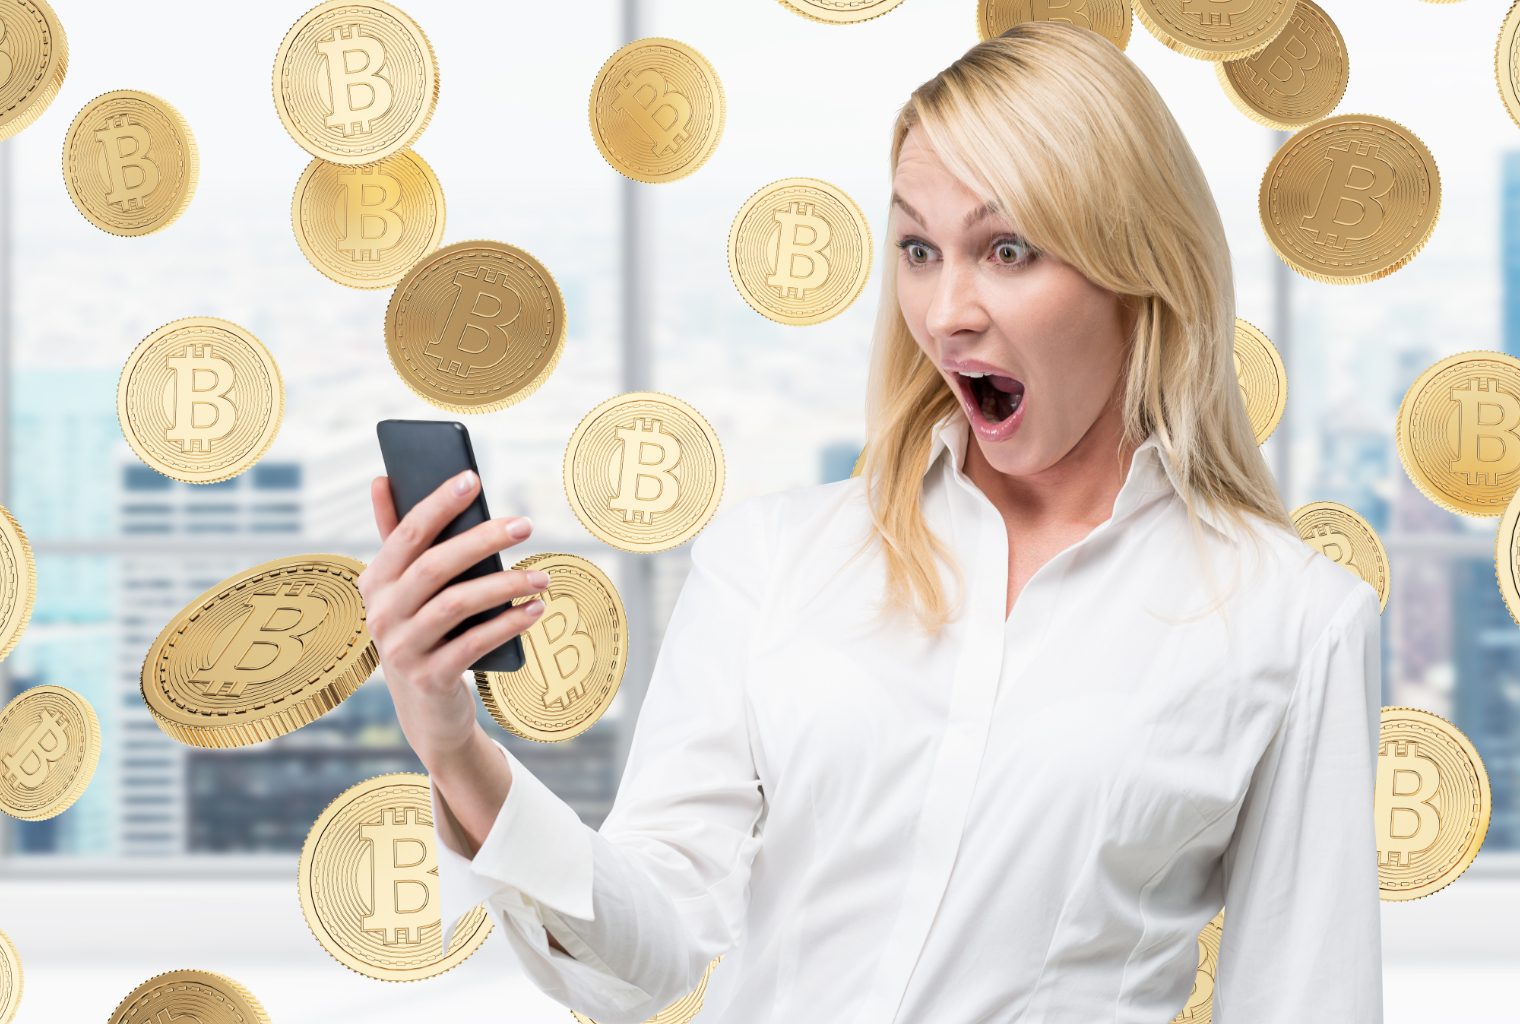 Bitcoin Revolution Review: % Scam or Legit? What No One is Saying